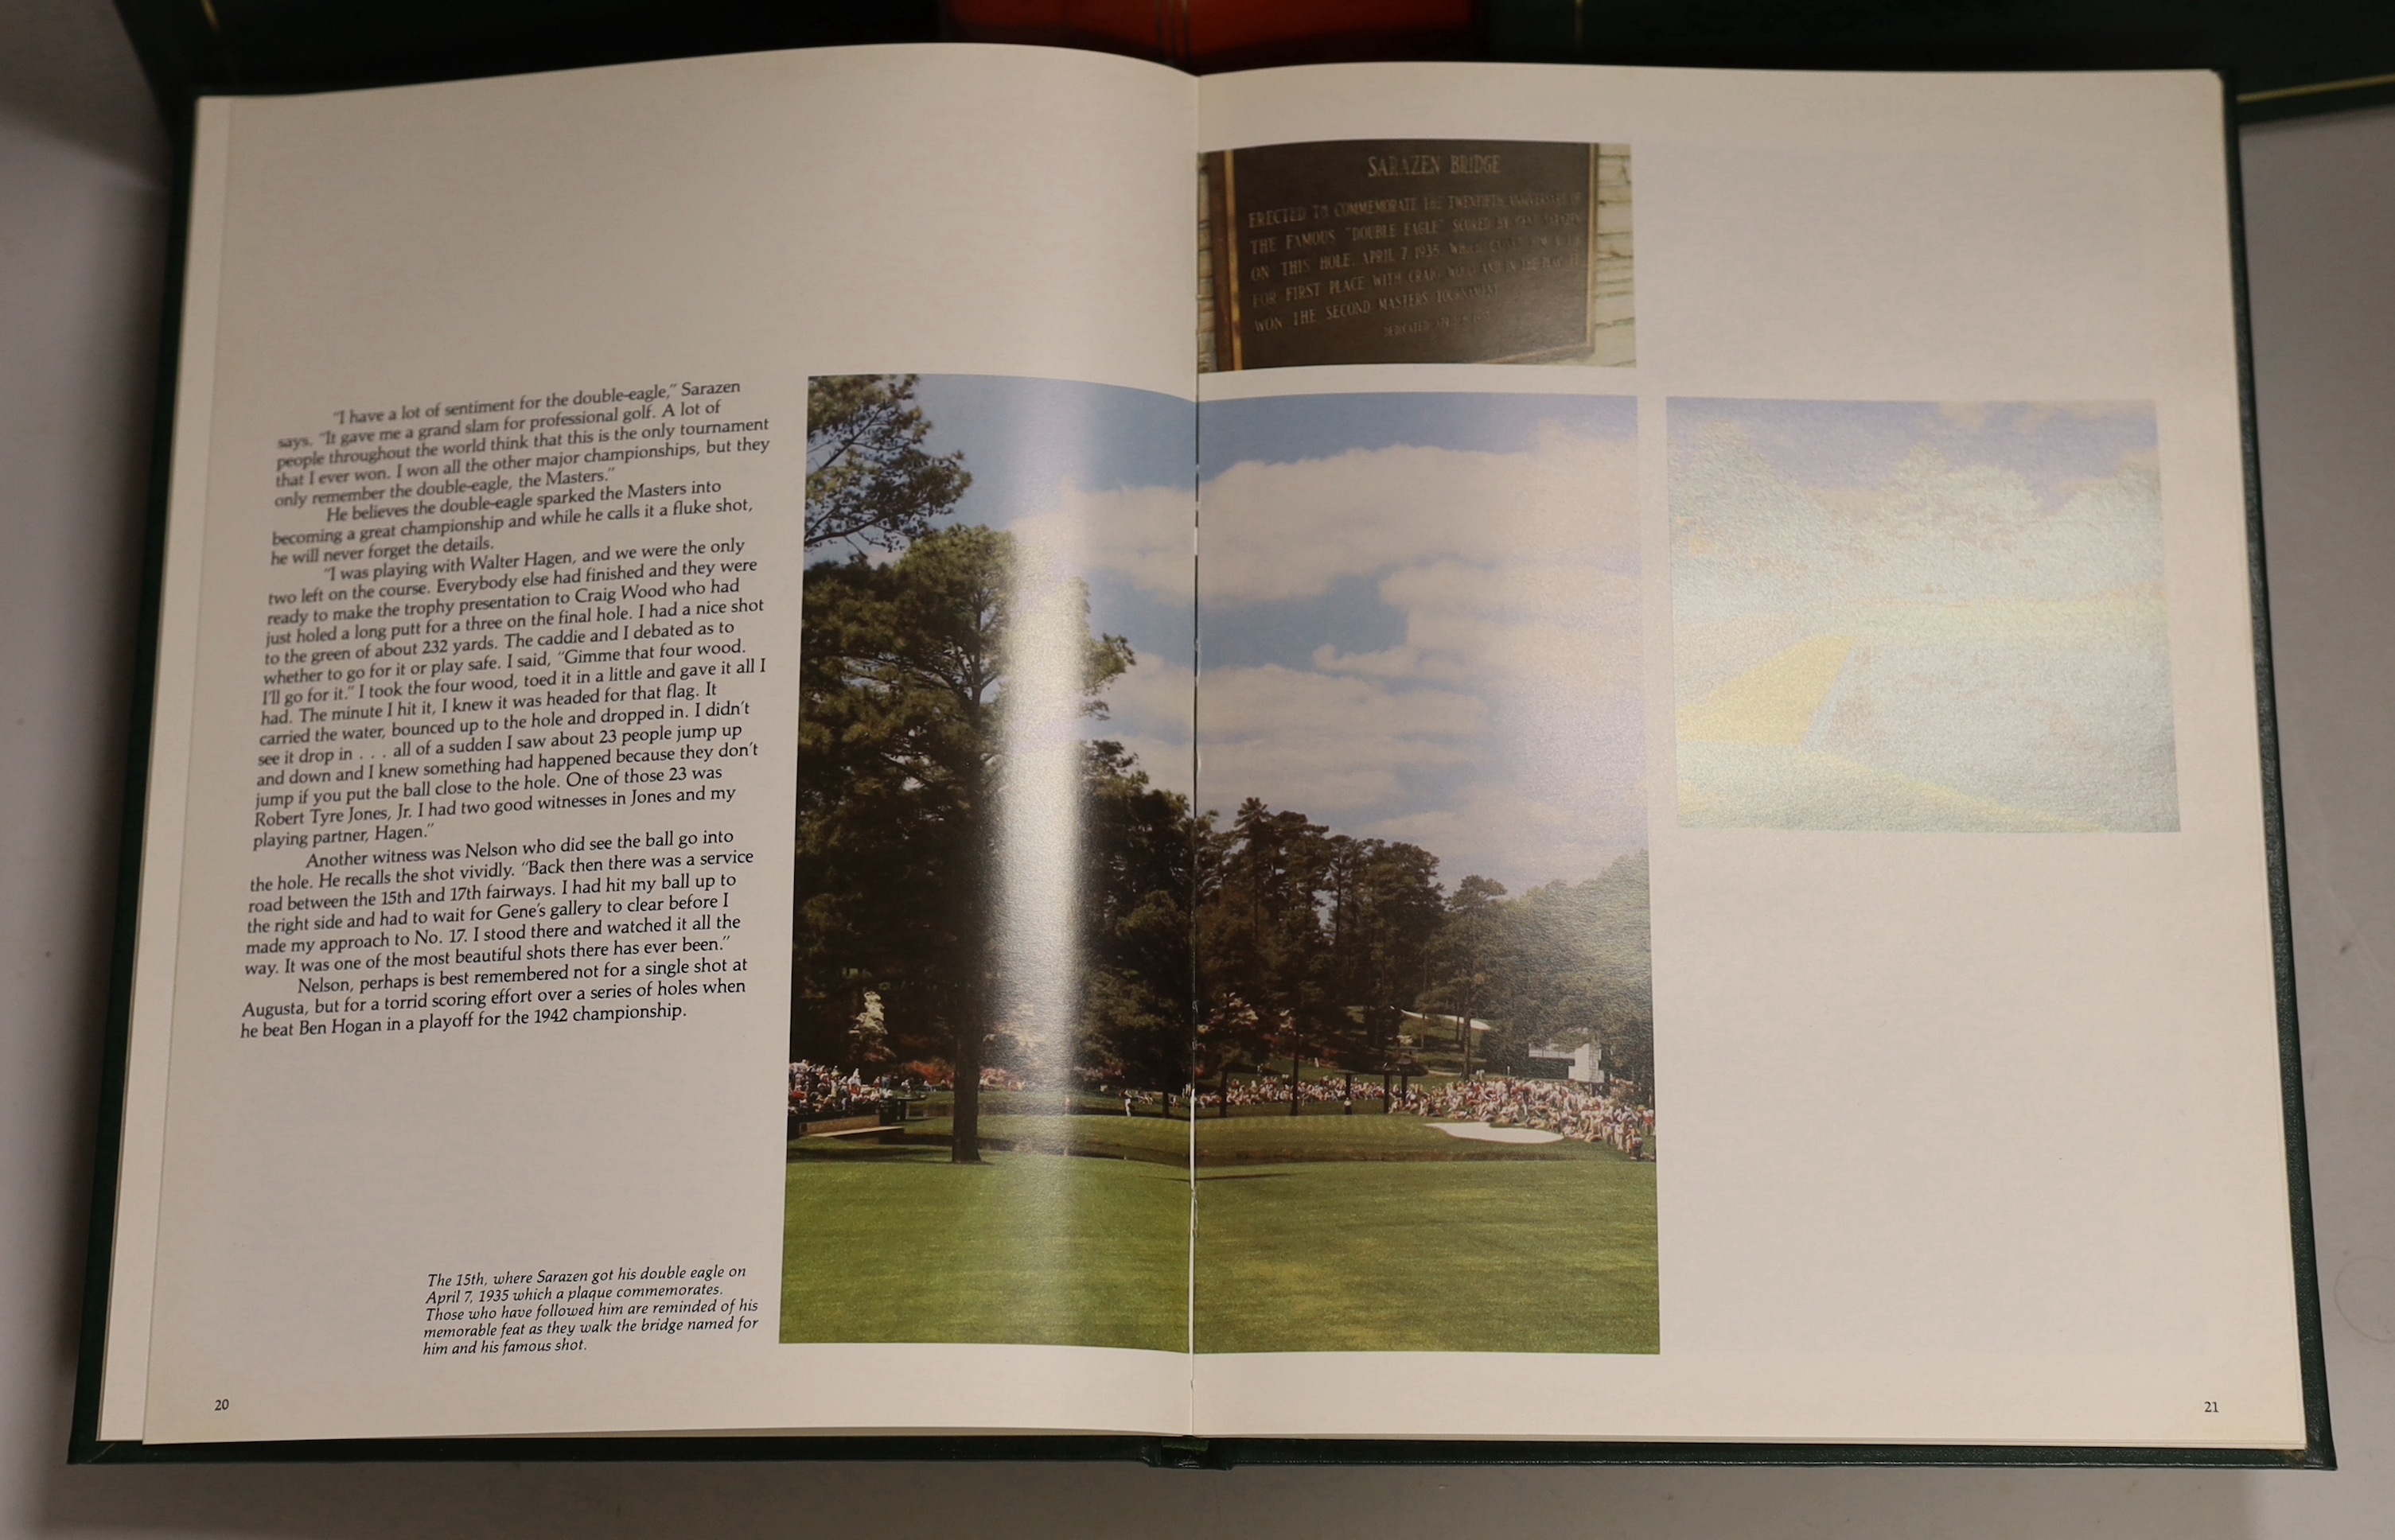 Golf Interest. An album containing photographs, menu and autographs of British Open Winners, gathered at the 1978 Dinner for Winners of the Open Championship, and various books on the British Open